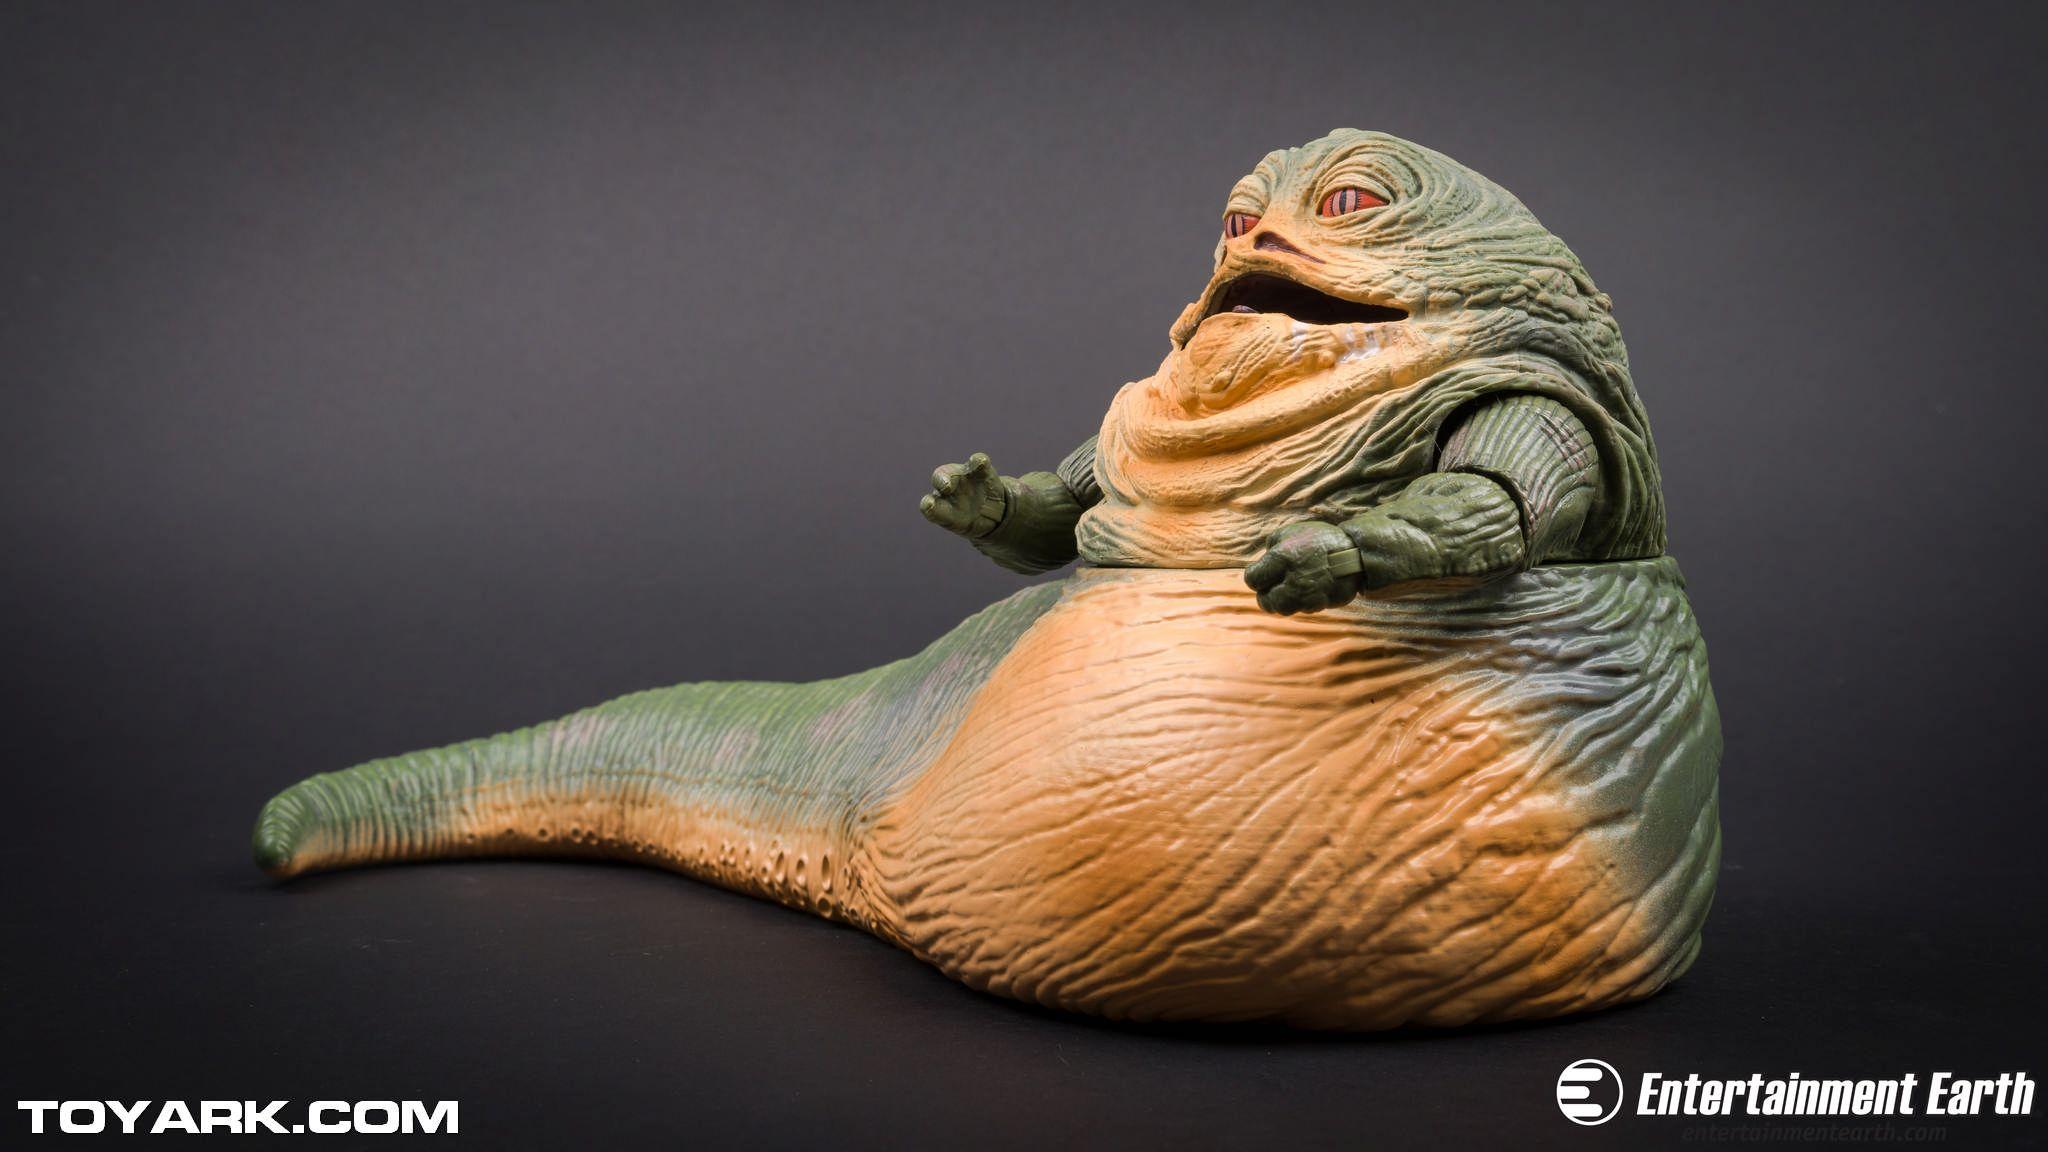 Star Wars Black Series Deluxe Jabba The Hutt Gallery